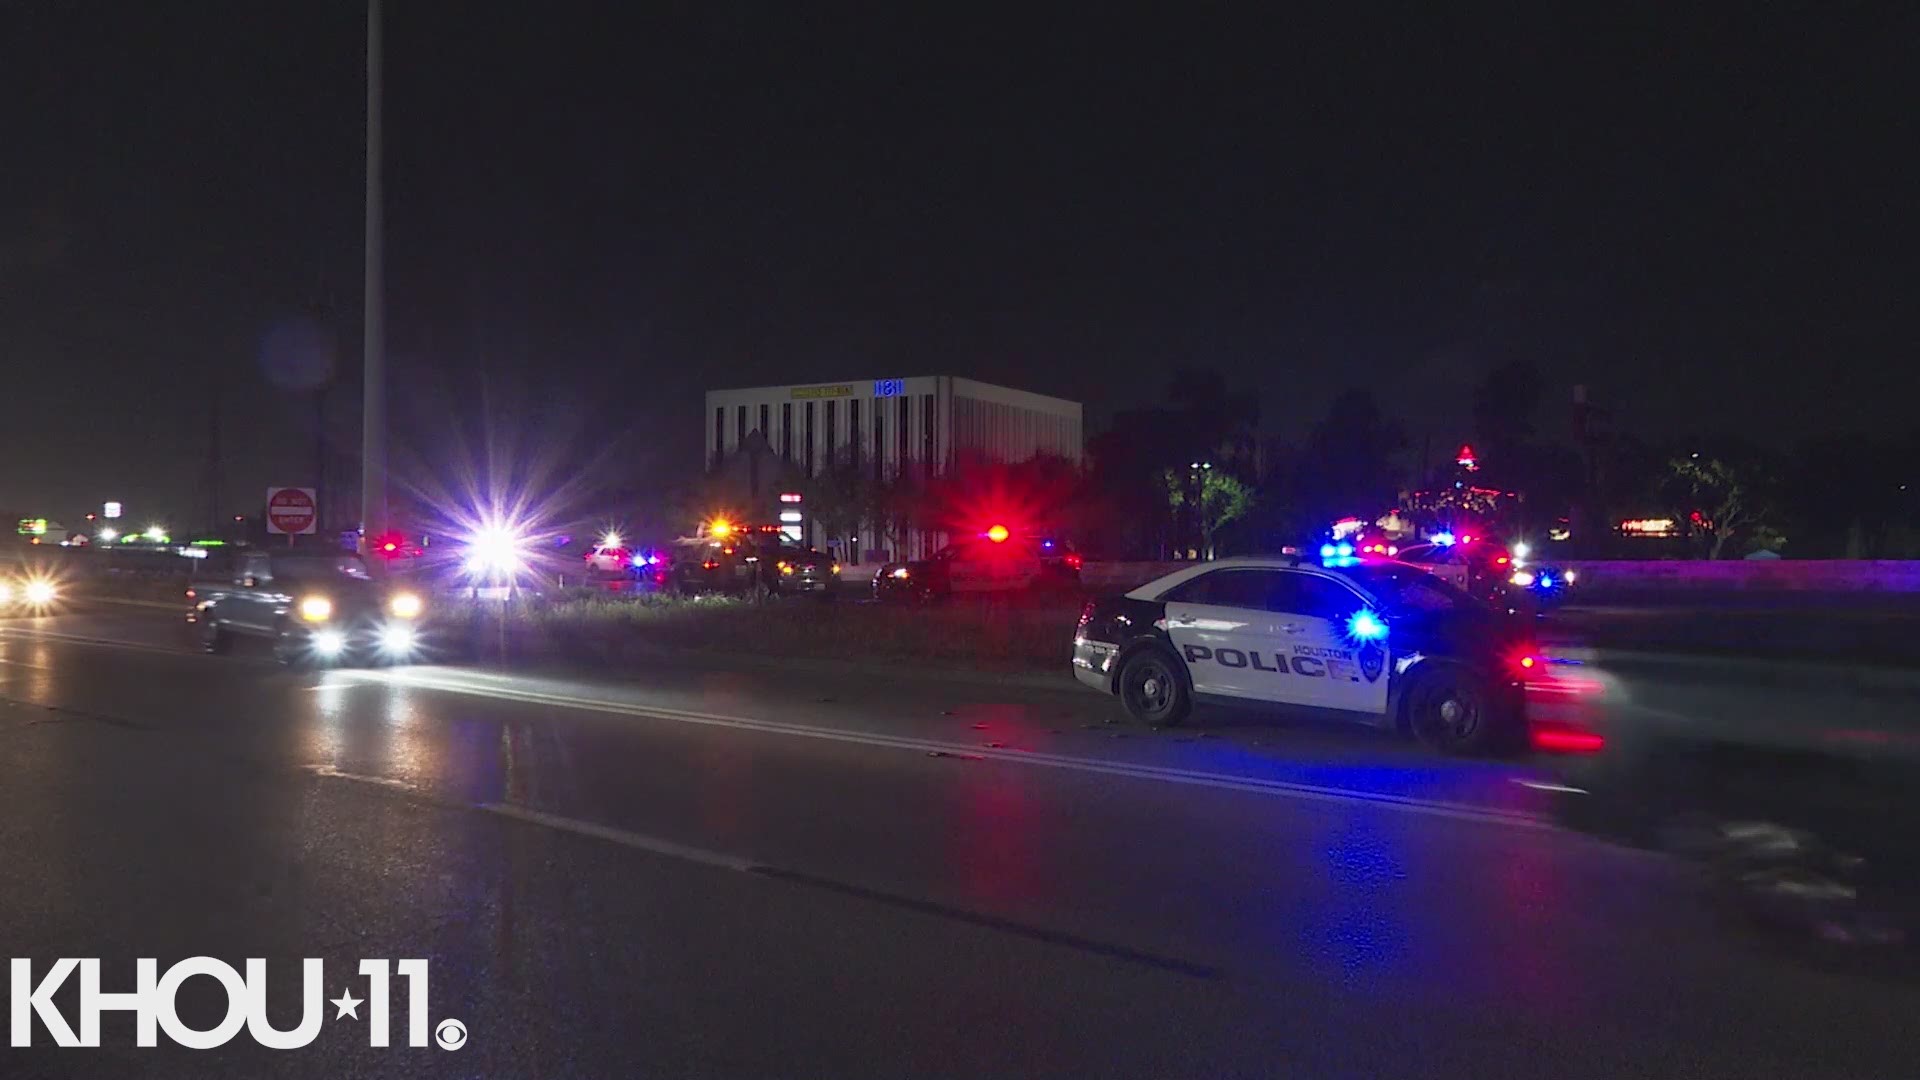 One person was hit and killed by a vehicle on the East Freeway near Normandy Friday, May 22.